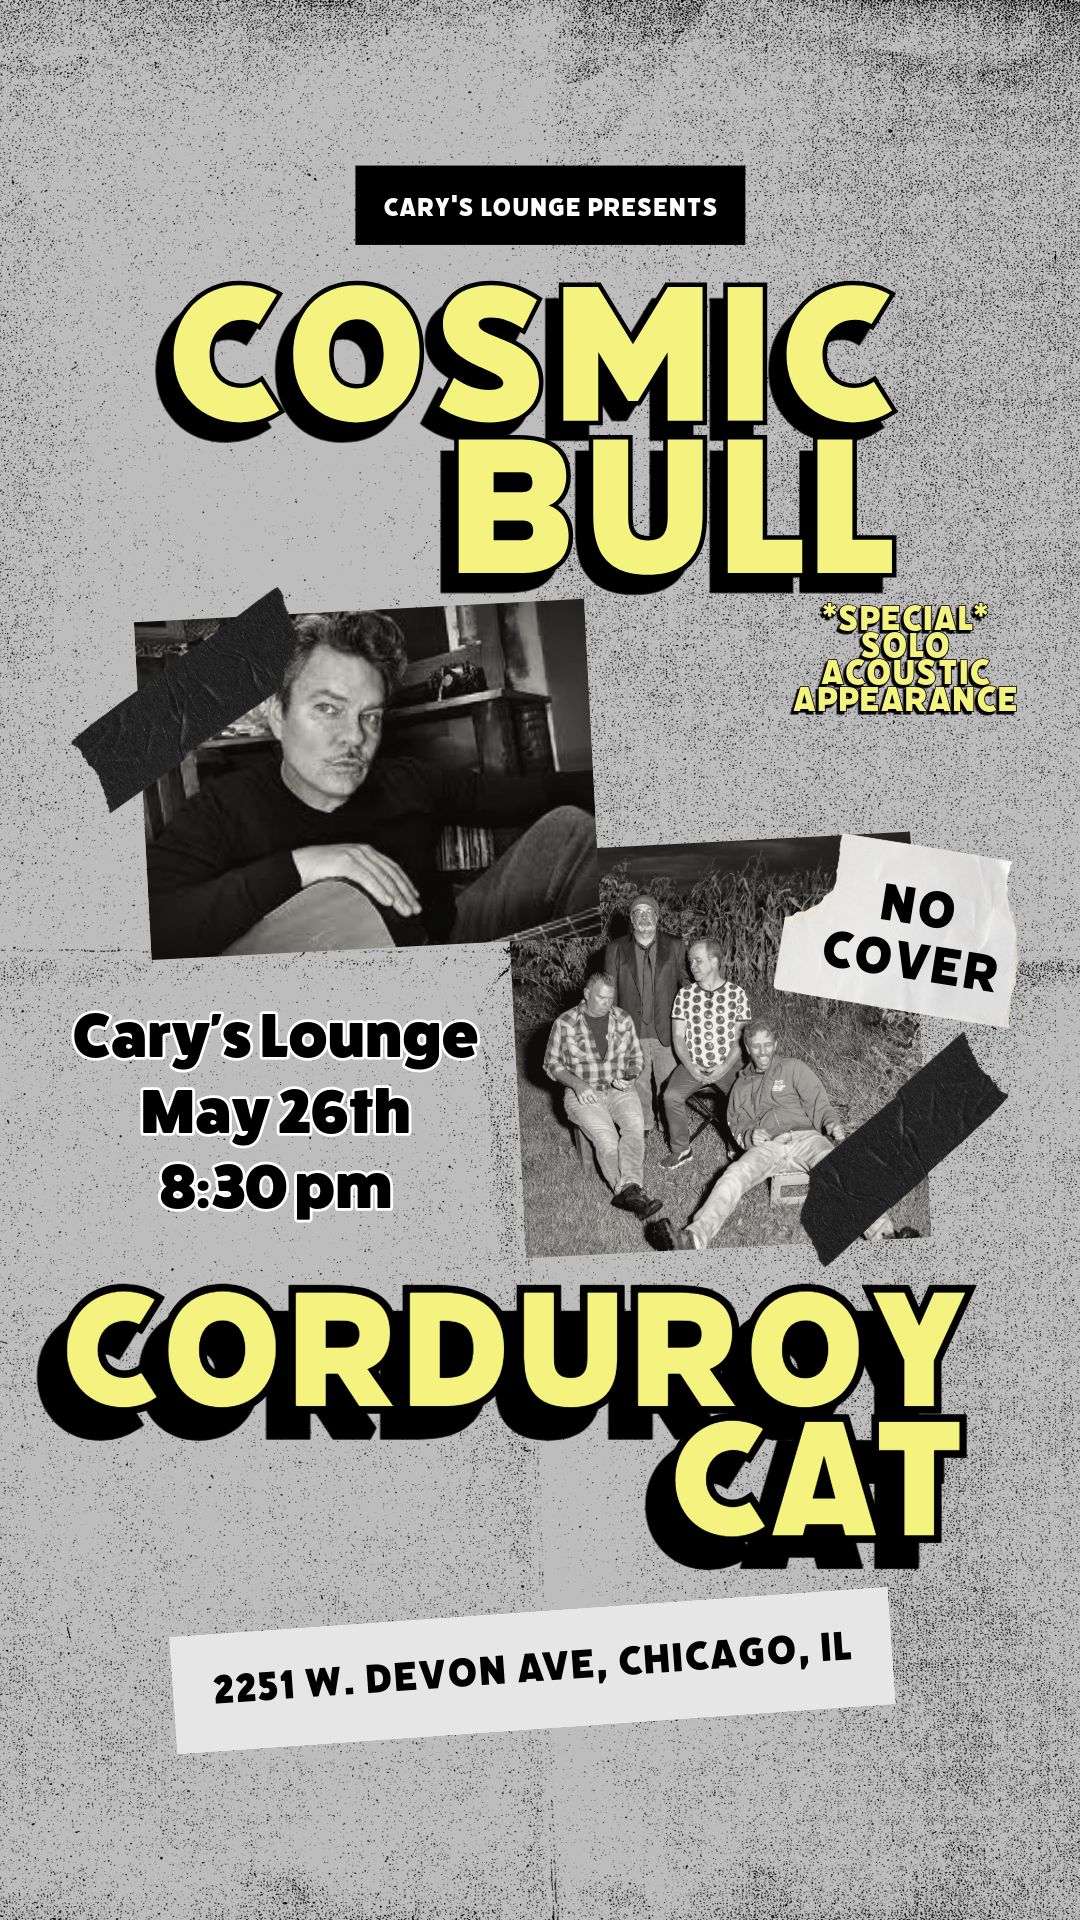 Solo acoustic set, opening for Corduroy Cat